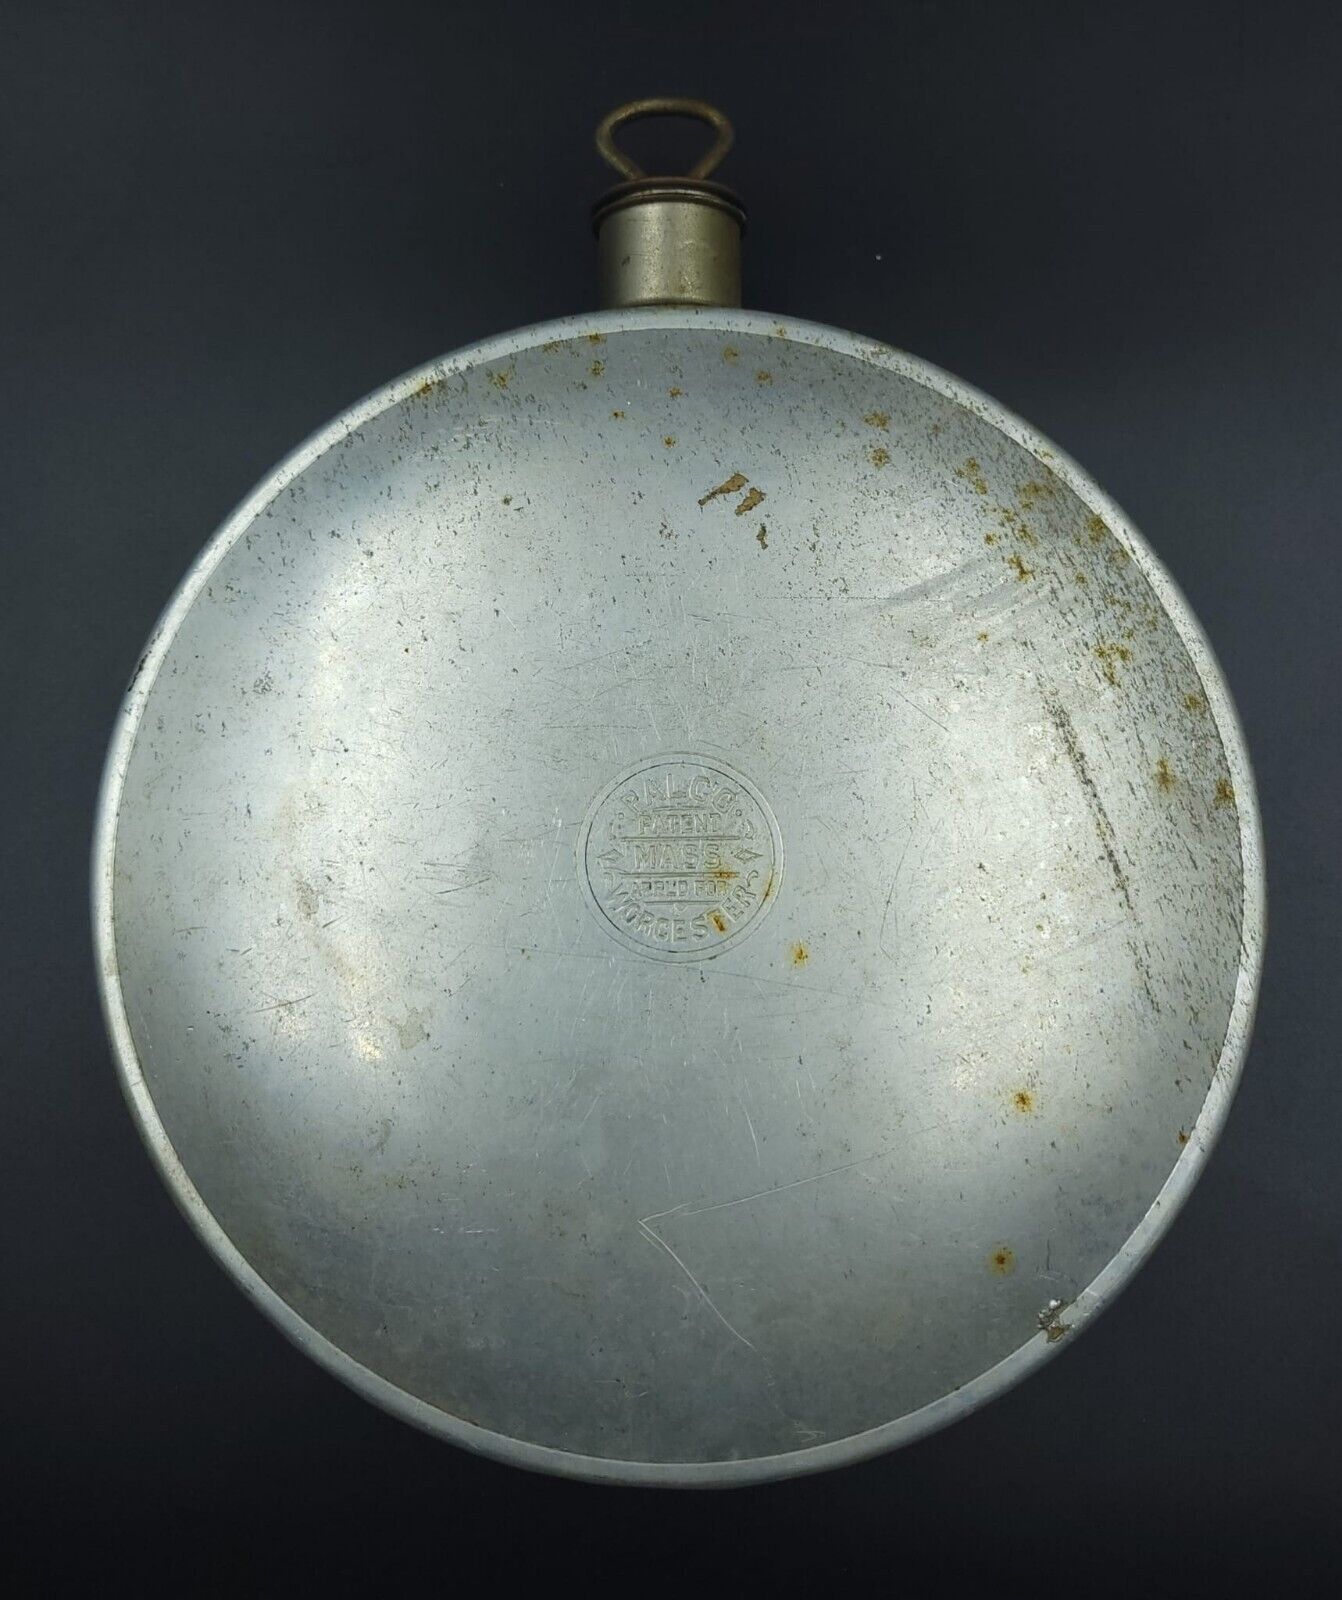 Antique WWI 1 ARMY SOLDIER PALCO WORCESTER MA USA PRESSED ALUMINUM CANTEEN